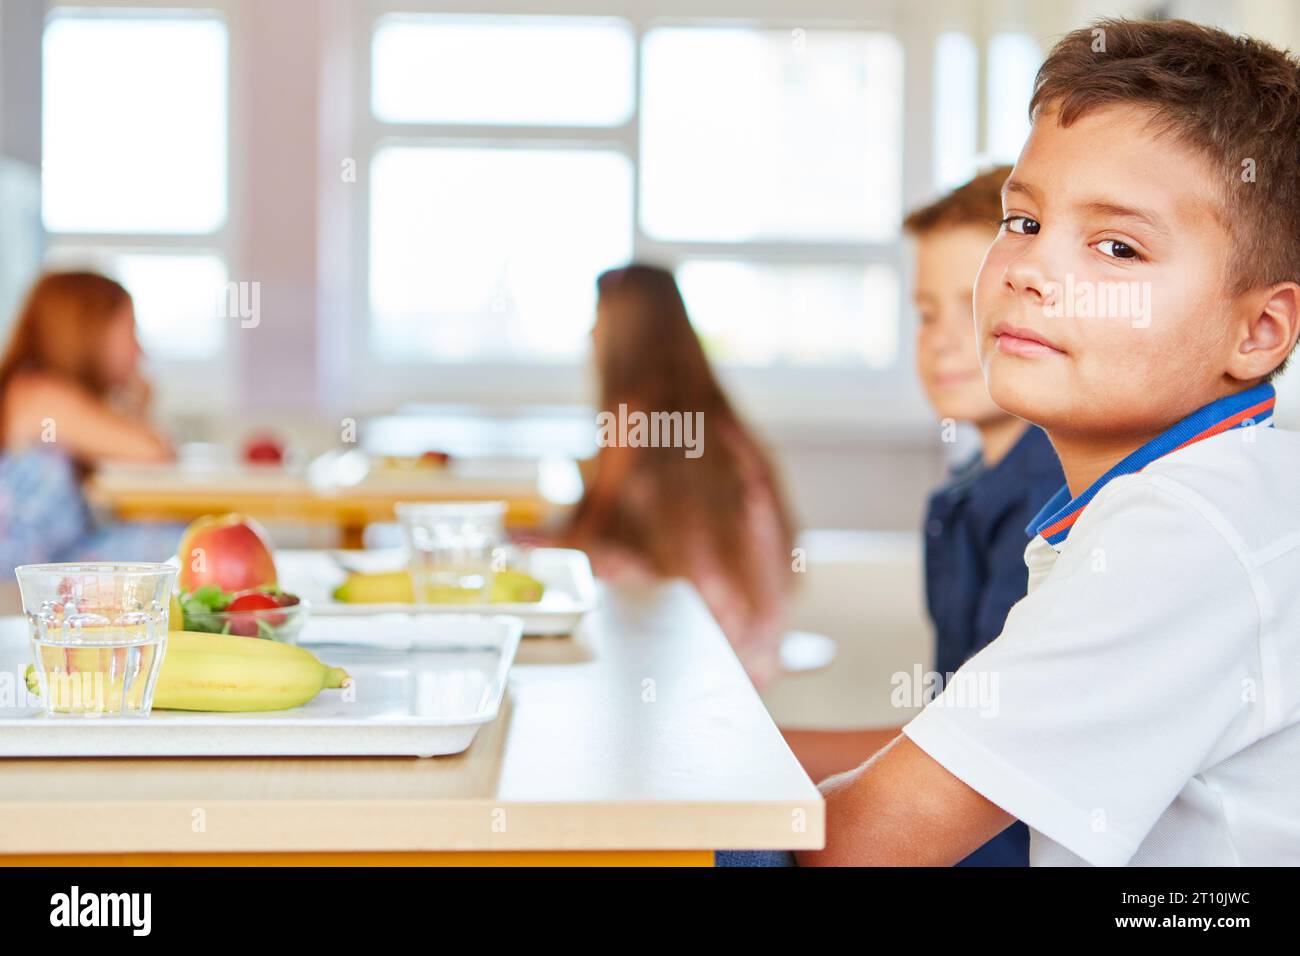 Side view portrait of boy sitting with fruits tray on table at cafeteria in school Stock Photo